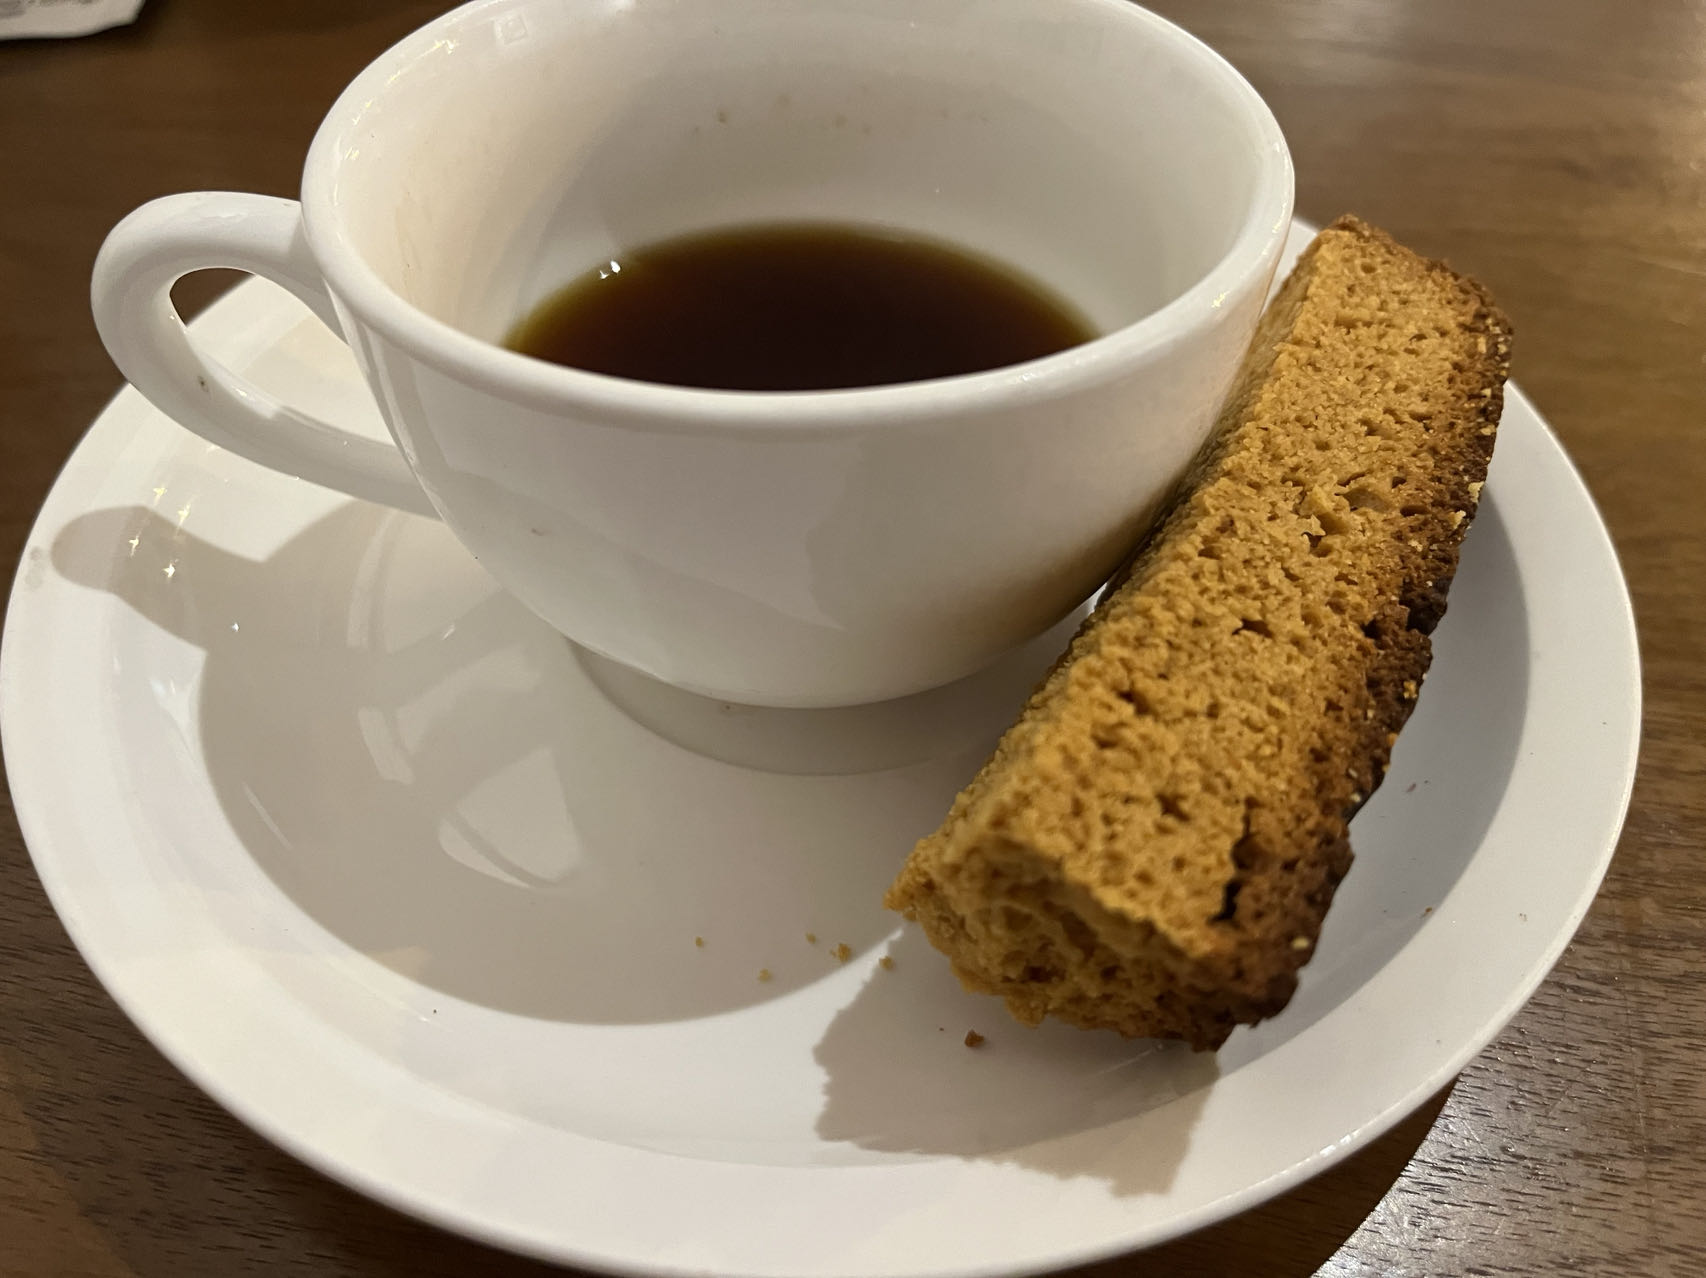 A rusk with a cup of coffee /CGTN